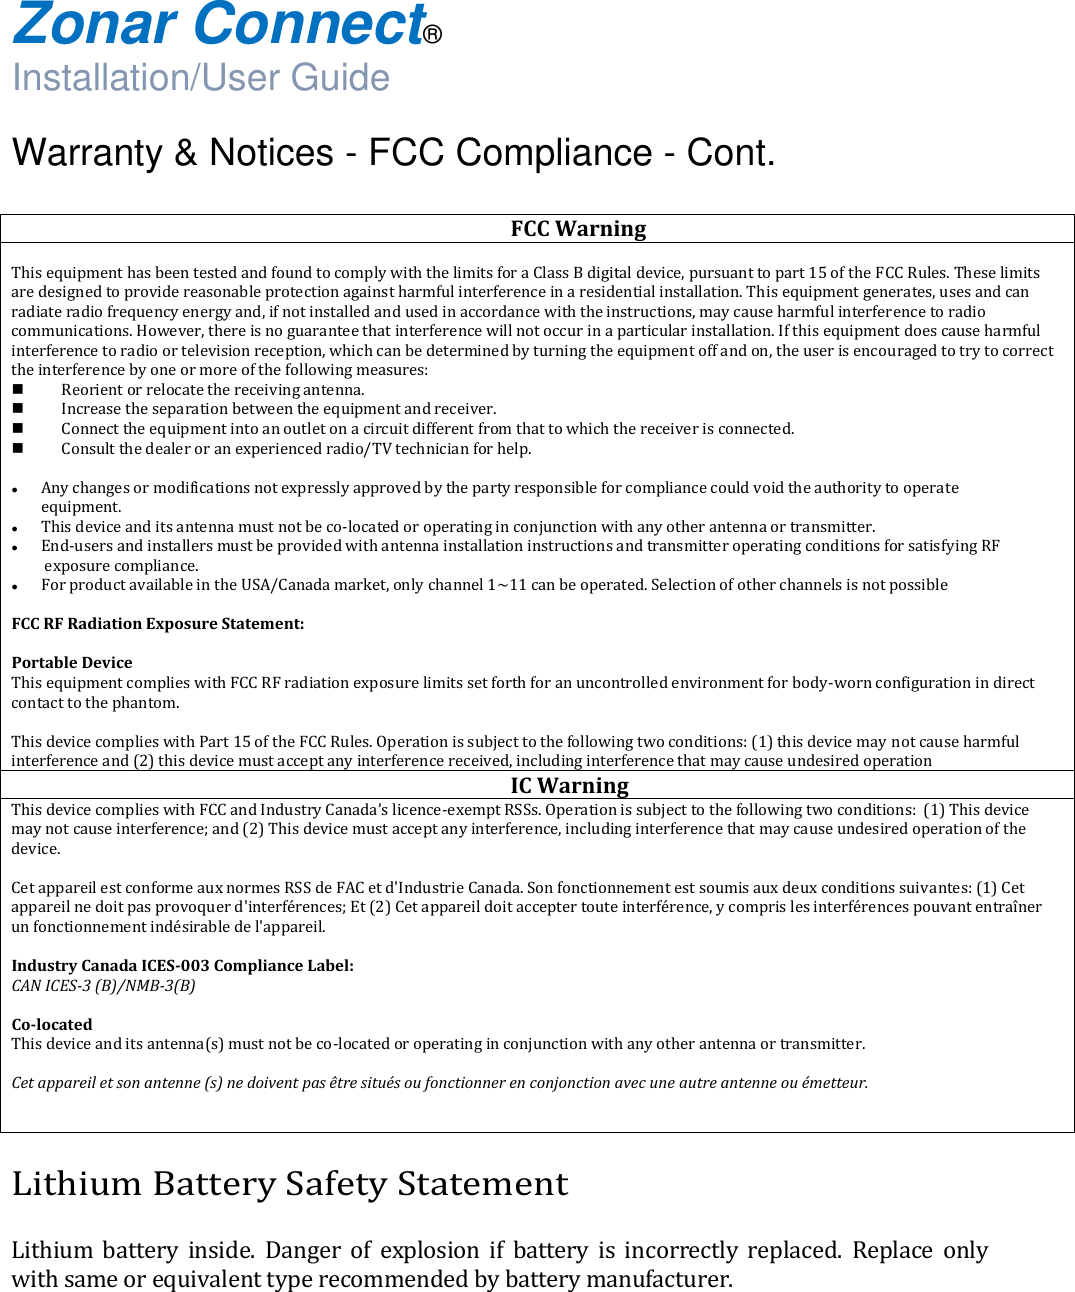  Zonar Connect®  Installation/User Guide  Warranty &amp; Notices - FCC Compliance - Cont.  Lithium Battery Safety Statement  Lithium  battery  inside.  Danger  of  explosion  if  battery  is  incorrectly  replaced.  Replace  only with same or equivalent type recommended by battery manufacturer.    FCC Warning   This equipment has been tested and found to comply with the limits for a Class B digital device, pursuant to part 15 of the FCC Rules. These limits are designed to provide reasonable protection against harmful interference in a residential installation. This equipment generates, uses and can radiate radio frequency energy and, if not installed and used in accordance with the instructions, may cause harmful interference to radio communications. However, there is no guarantee that interference will not occur in a particular installation. If this equipment does cause harmful interference to radio or television reception, which can be determined by turning the equipment off and on, the user is encouraged to try to correct the interference by one or more of the following measures:  Reorient or relocate the receiving antenna.  Increase the separation between the equipment and receiver.  Connect the equipment into an outlet on a circuit different from that to which the receiver is connected.  Consult the dealer or an experienced radio/TV technician for help.   Any changes or modifications not expressly approved by the party responsible for compliance could void the authority to operate  equipment.  This device and its antenna must not be co-located or operating in conjunction with any other antenna or transmitter.  End-users and installers must be provided with antenna installation instructions and transmitter operating conditions for satisfying RF  exposure compliance.  For product available in the USA/Canada market, only channel 1~11 can be operated. Selection of other channels is not possible  FCC RF Radiation Exposure Statement:  Portable Device This equipment complies with FCC RF radiation exposure limits set forth for an uncontrolled environment for body-worn configuration in direct contact to the phantom.  This device complies with Part 15 of the FCC Rules. Operation is subject to the following two conditions: (1) this device may not cause harmful interference and (2) this device must accept any interference received, including interference that may cause undesired operation  IC Warning This device complies with FCC and Industry Canada’s licence-exempt RSSs. Operation is subject to the following two conditions:  (1) This device may not cause interference; and (2) This device must accept any interference, including interference that may cause undesired operation of the device.  Cet appareil est conforme aux normes RSS de FAC et d&apos;Industrie Canada. Son fonctionnement est soumis aux deux conditions suivantes: (1) Cet appareil ne doit pas provoquer d&apos;interférences; Et (2) Cet appareil doit accepter toute interférence, y compris les interférences pouvant entraîner un fonctionnement indésirable de l&apos;appareil.  Industry Canada ICES-003 Compliance Label: CAN ICES-3 (B)/NMB-3(B)   Co-located This device and its antenna(s) must not be co-located or operating in conjunction with any other antenna or transmitter.  Cet appareil et son antenne (s) ne doivent pas être situés ou fonctionner en conjonction avec une autre antenne ou émetteur.   